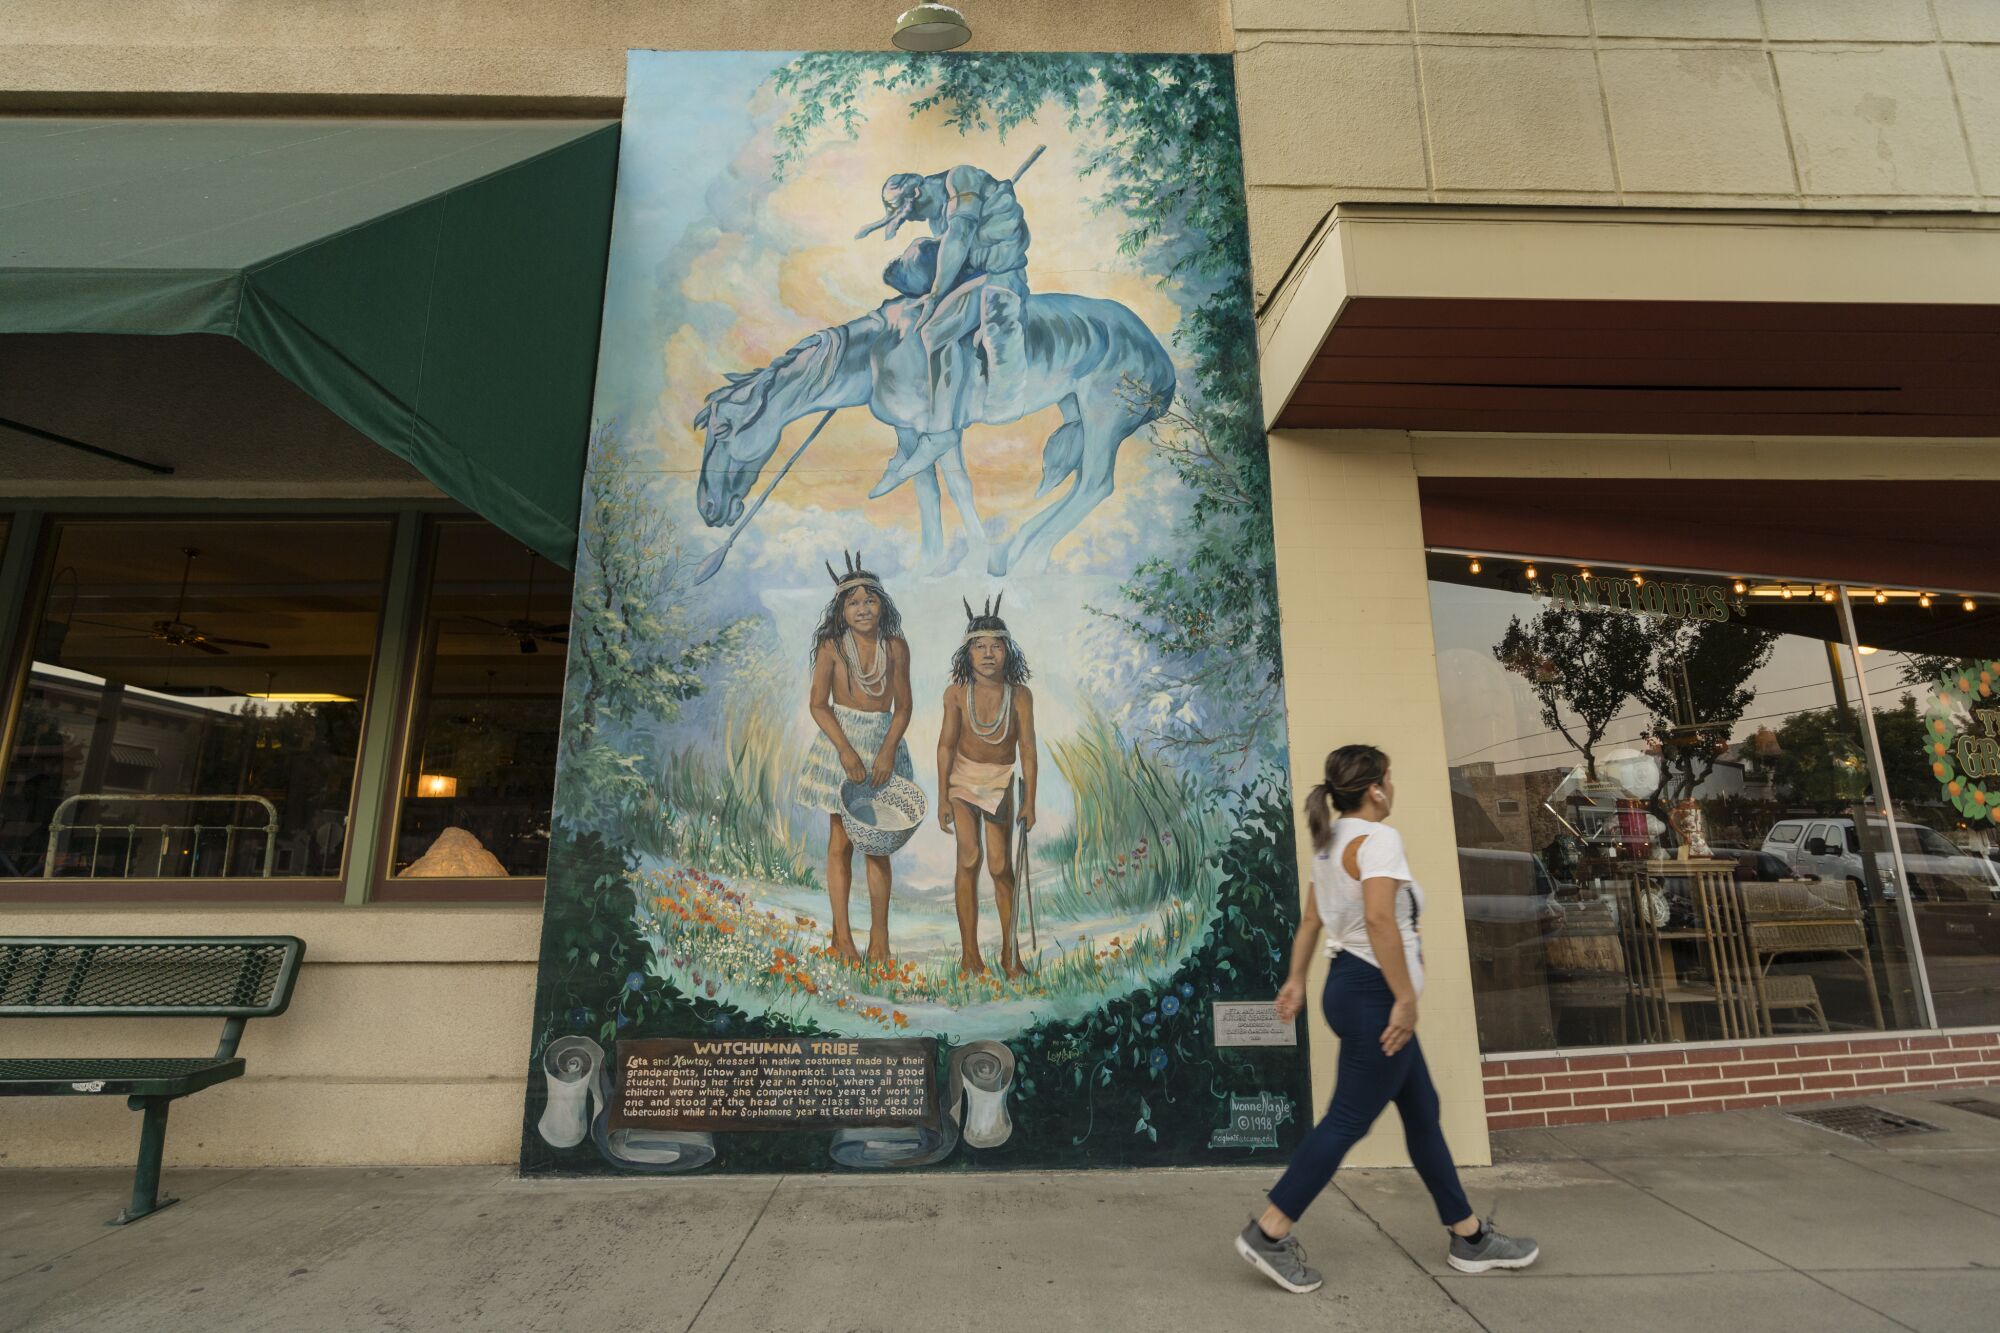 The walls of shops and businesses in Exeter, Calif., are graced with many murals.